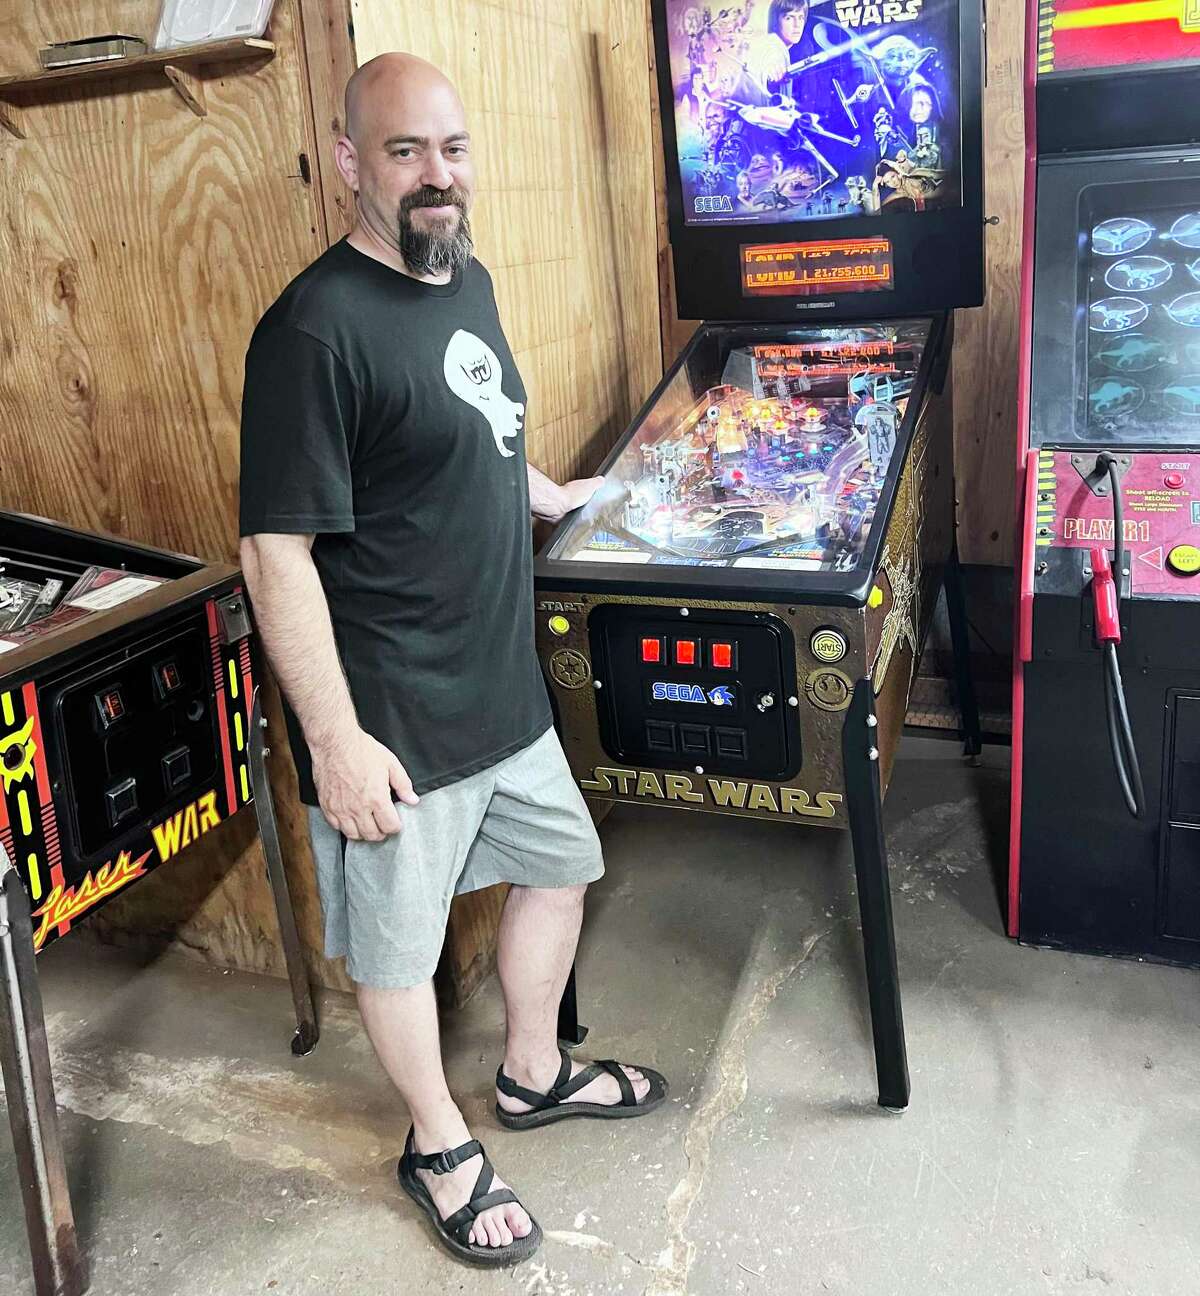 Brian Joy, shown in front of a 1996 Star Wars pinball machine, has a host of arcade games at the Pinshack, which he is opening at 12 Summit St. in East Hampton in September.